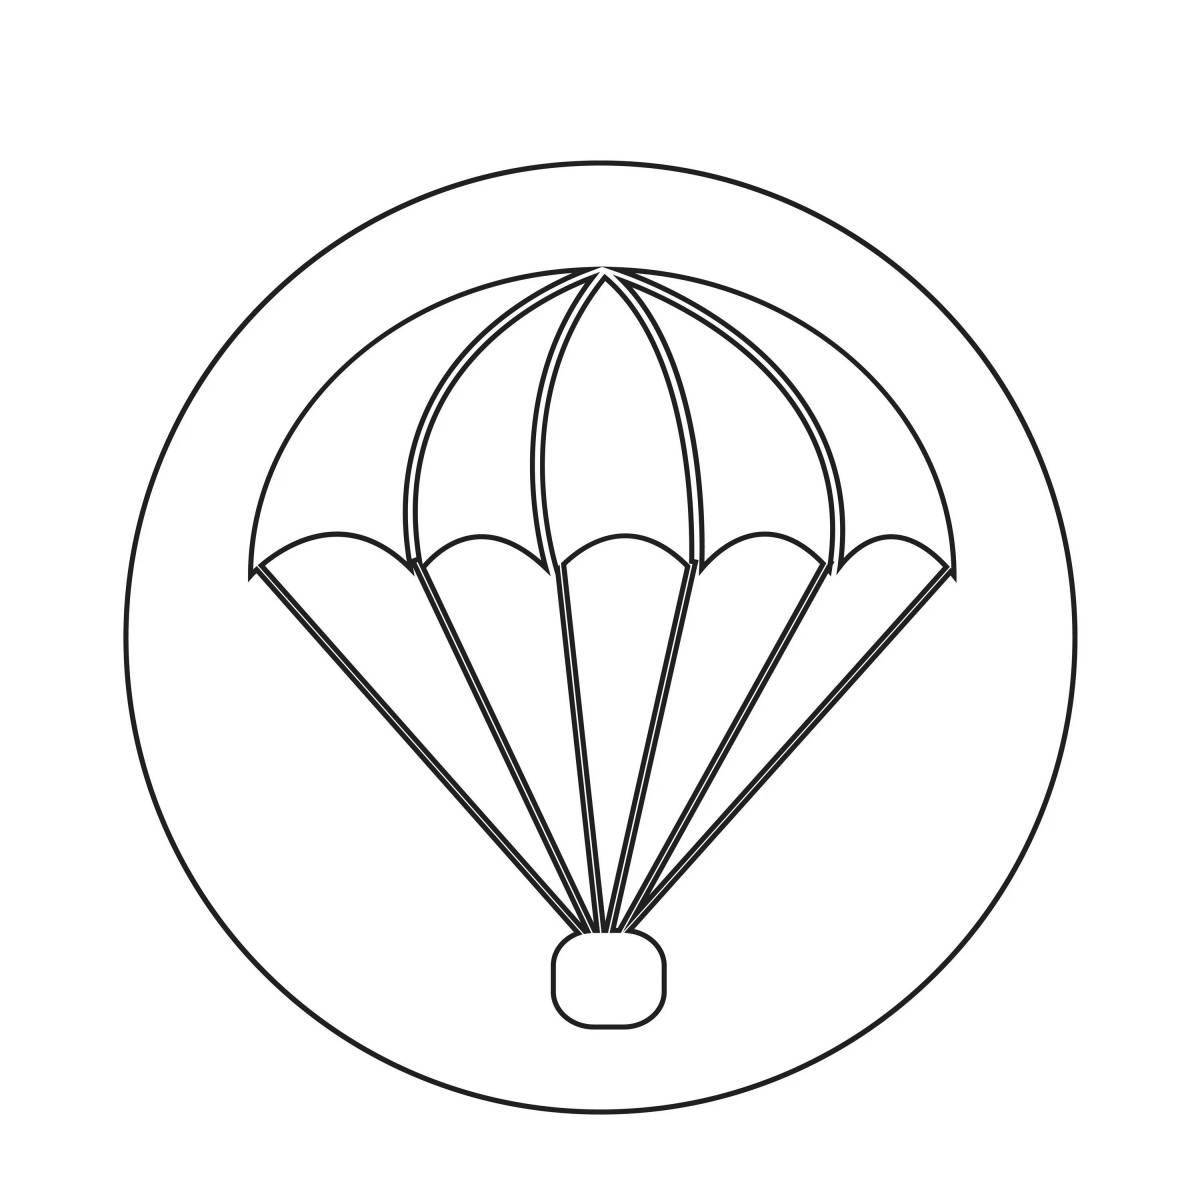 Strong skydiver coloring pages for kids